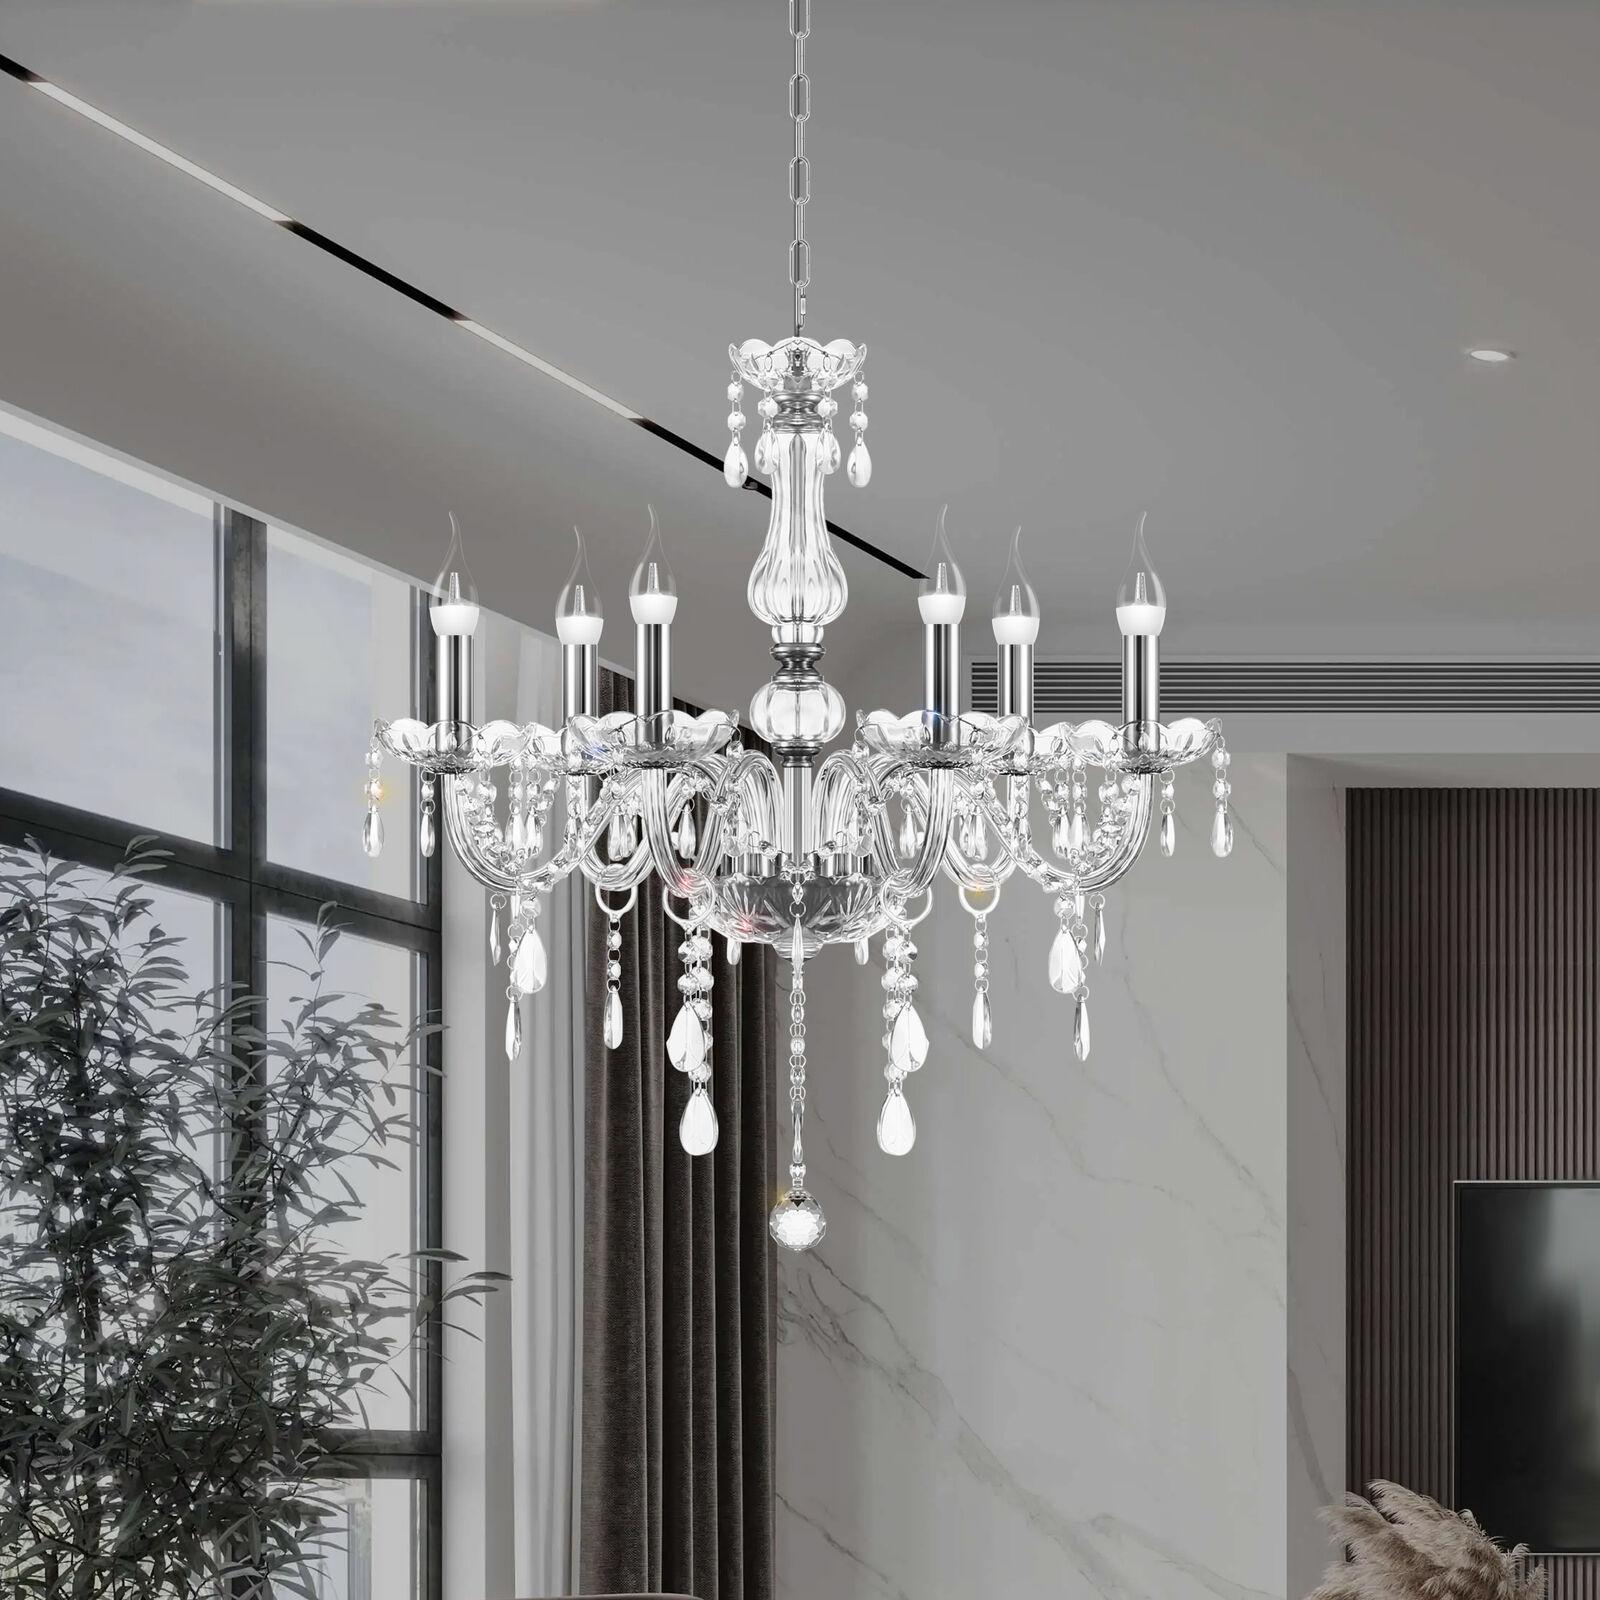 Crystal CEILING LAMP, Pendant Light Long Hollywood Regency Chandelier
There is space for five bulbs with small and large prisms.
Description：

6 A large illumination area can create a romantic atmosphere and provide a soft sparkle to every lovely